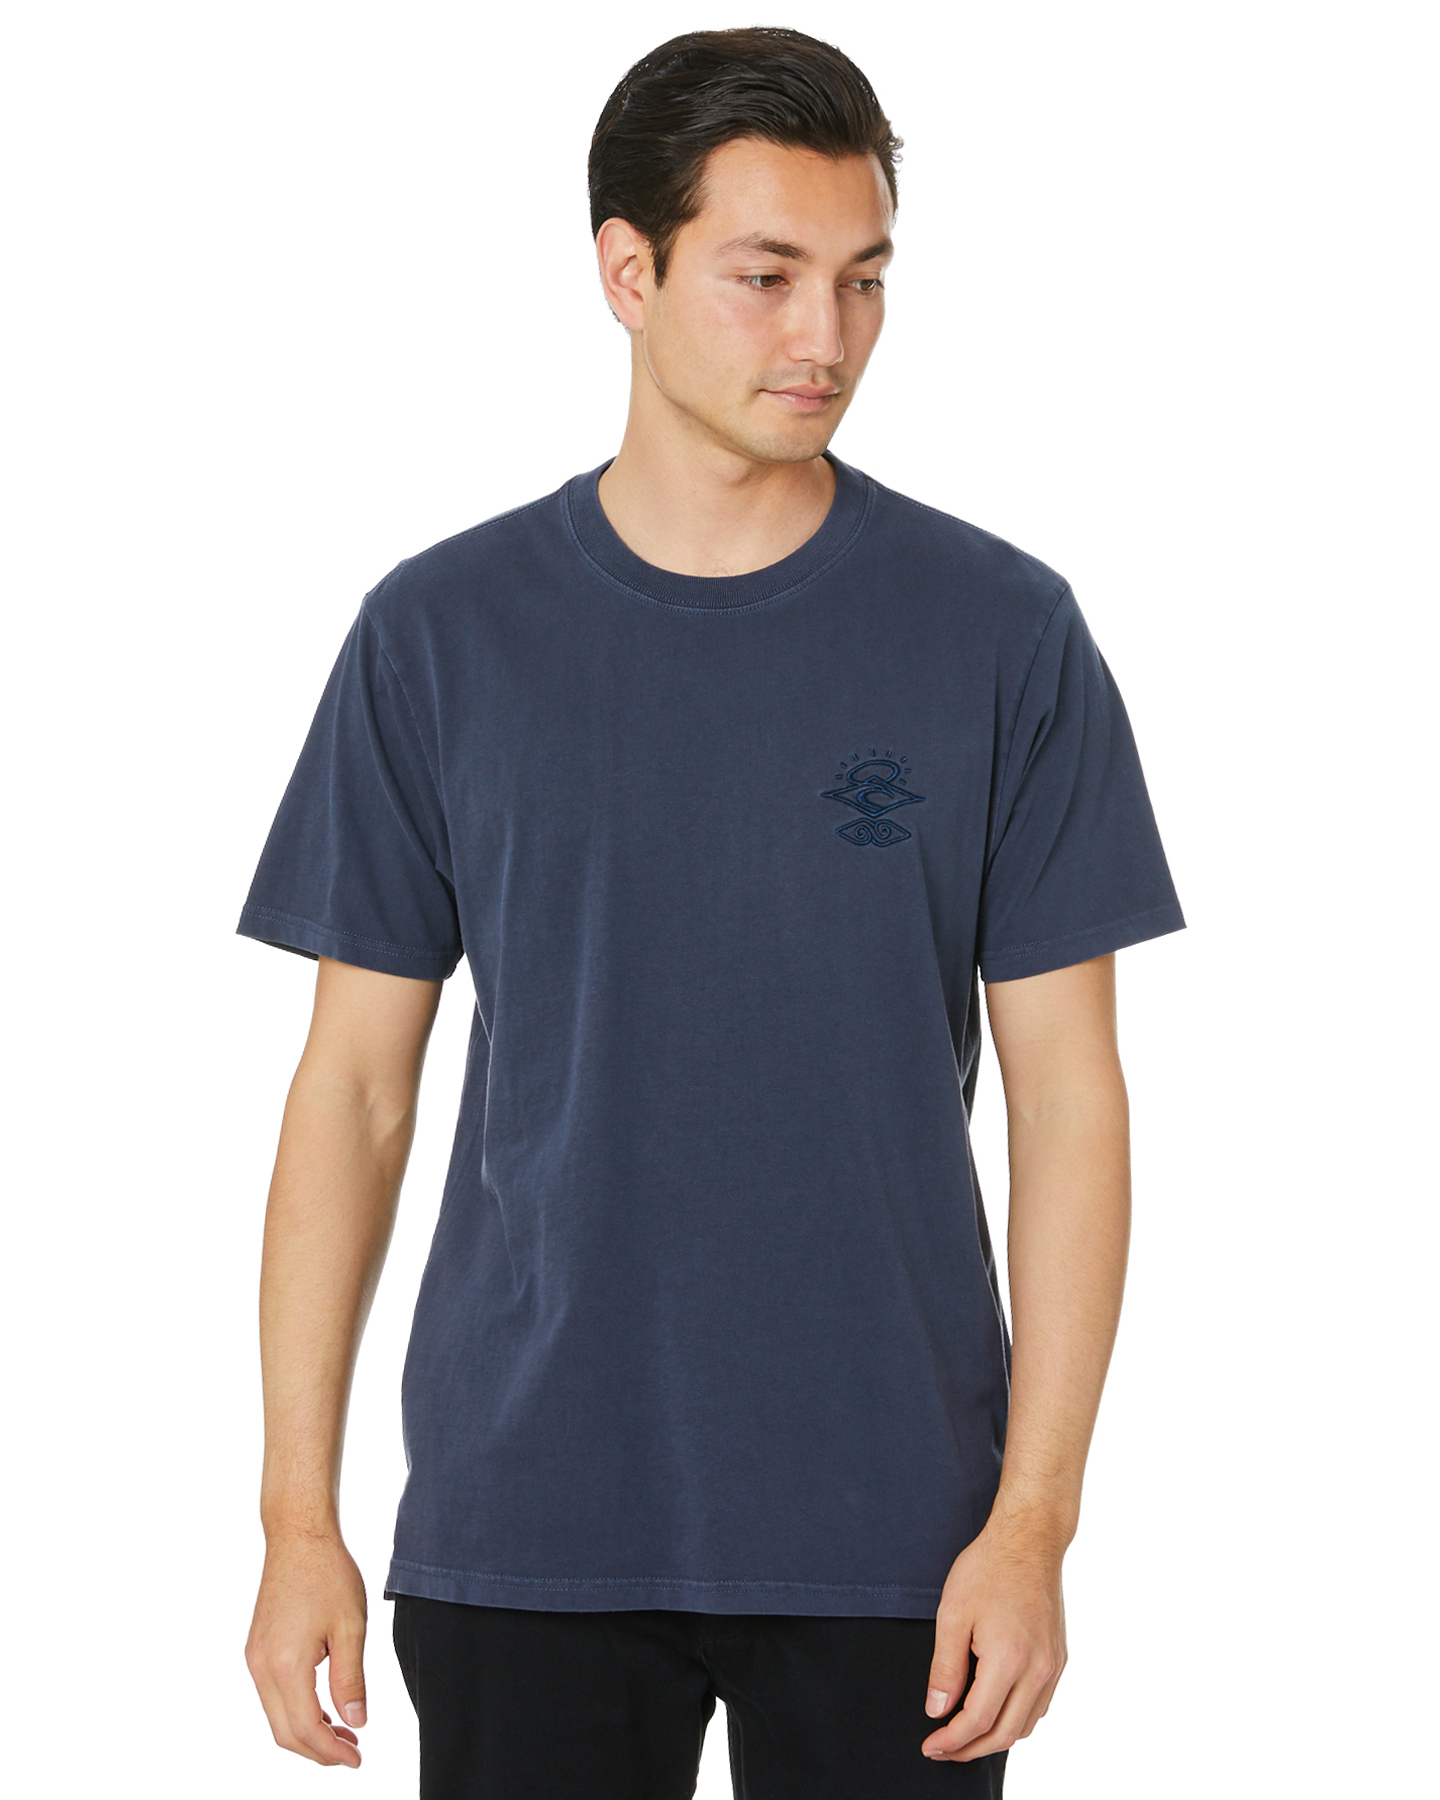 Rip Curl Searchers Mens Tee - Navy | SurfStitch